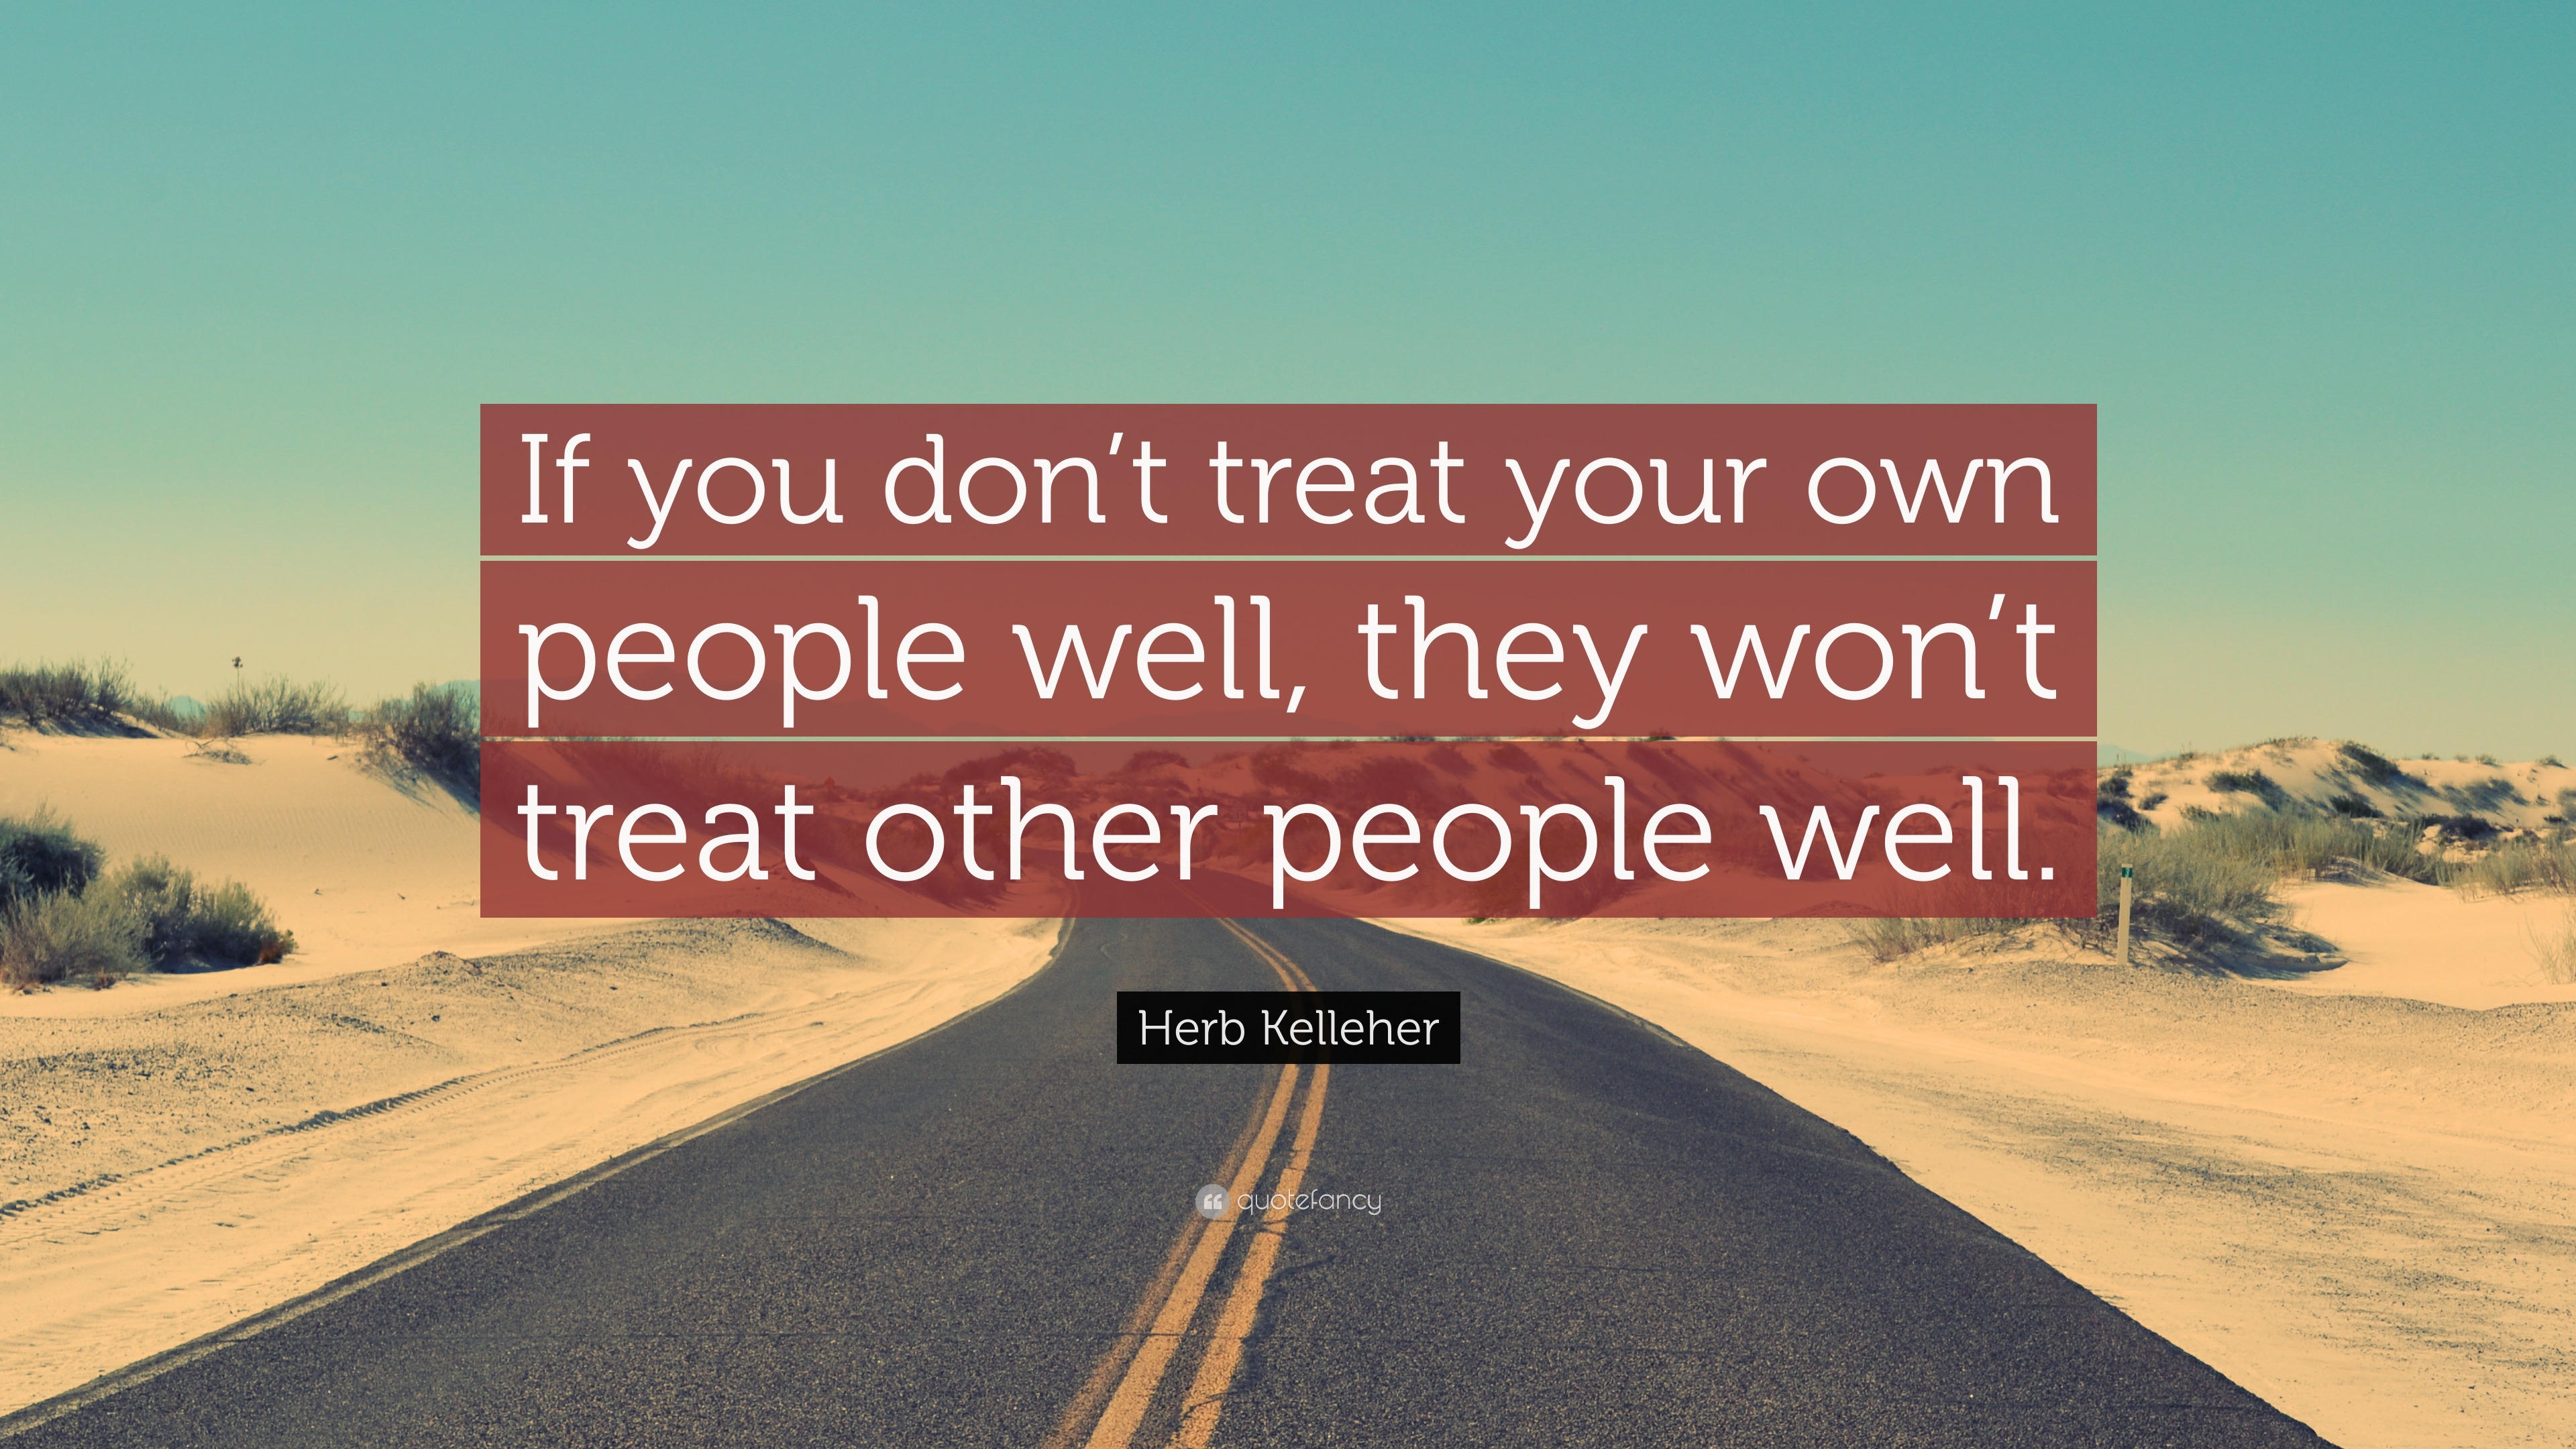 Herb Kelleher Quote: “If you don’t treat your own people well, they won